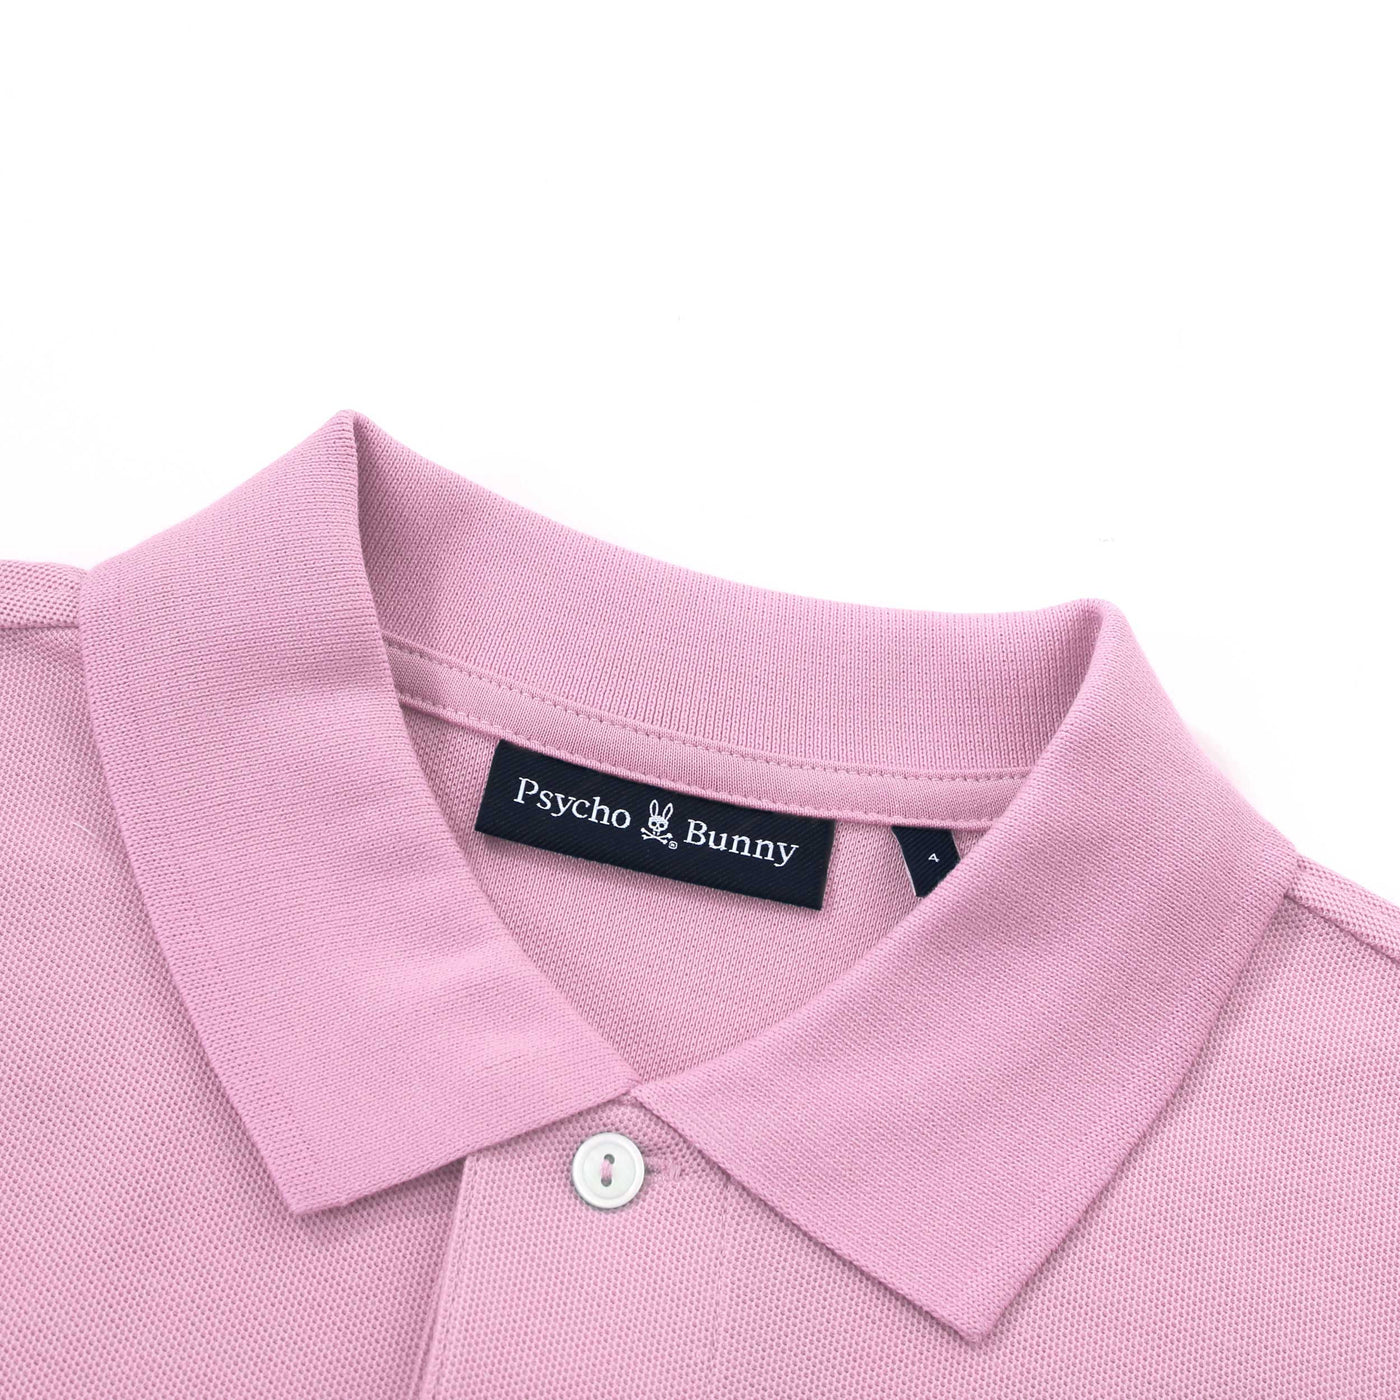 Psycho Bunny Classic Polo Shirt in Pastel Lavender Pink Collar